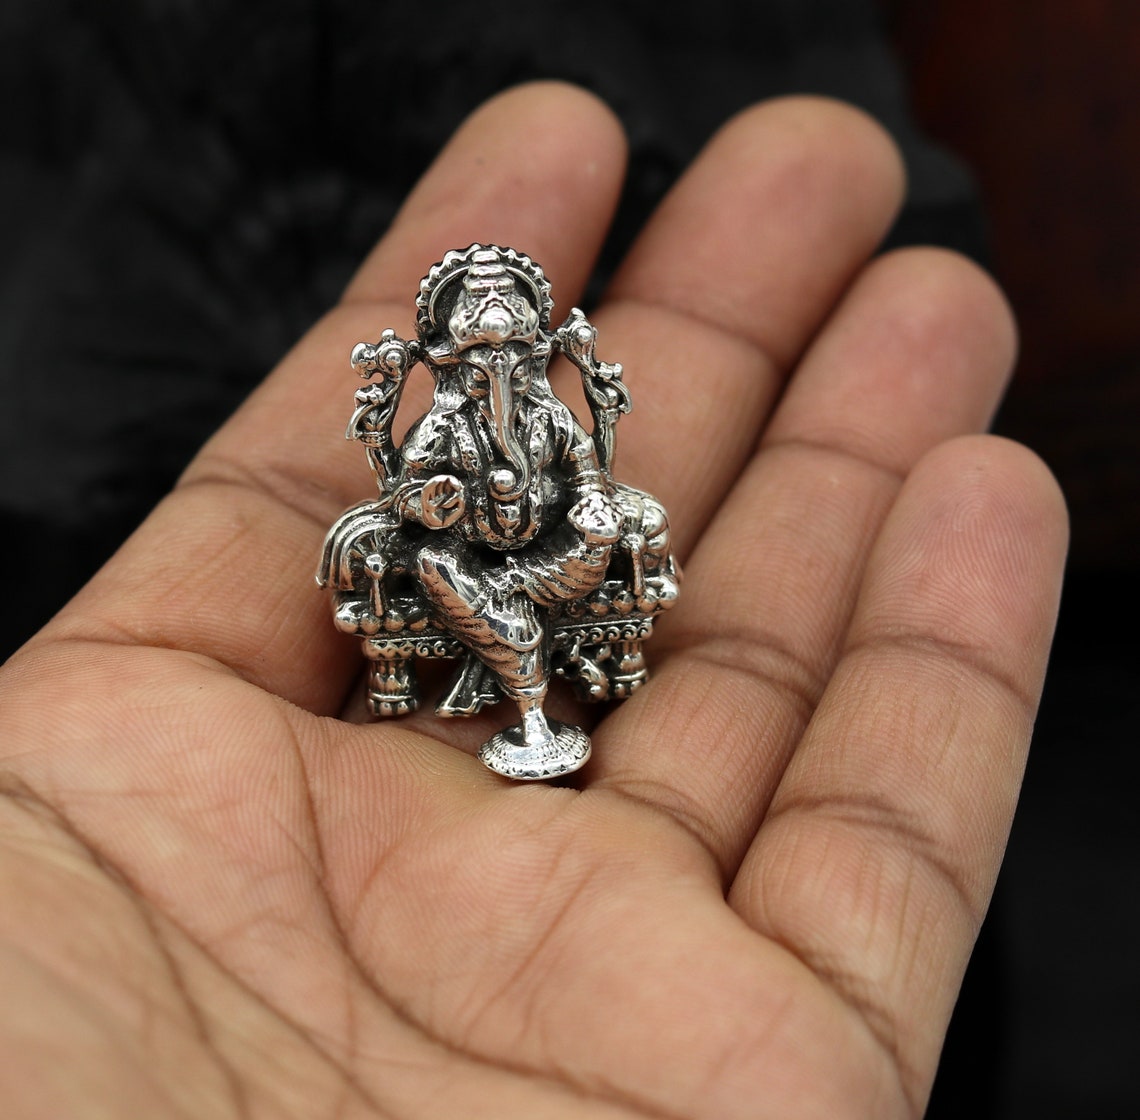 Ganesh Shiv Ji Idol Murti Idol Sculpture for Home and Office Temple and Gift  Decor Decorative Showpiece 14.43 Cm - Etsy